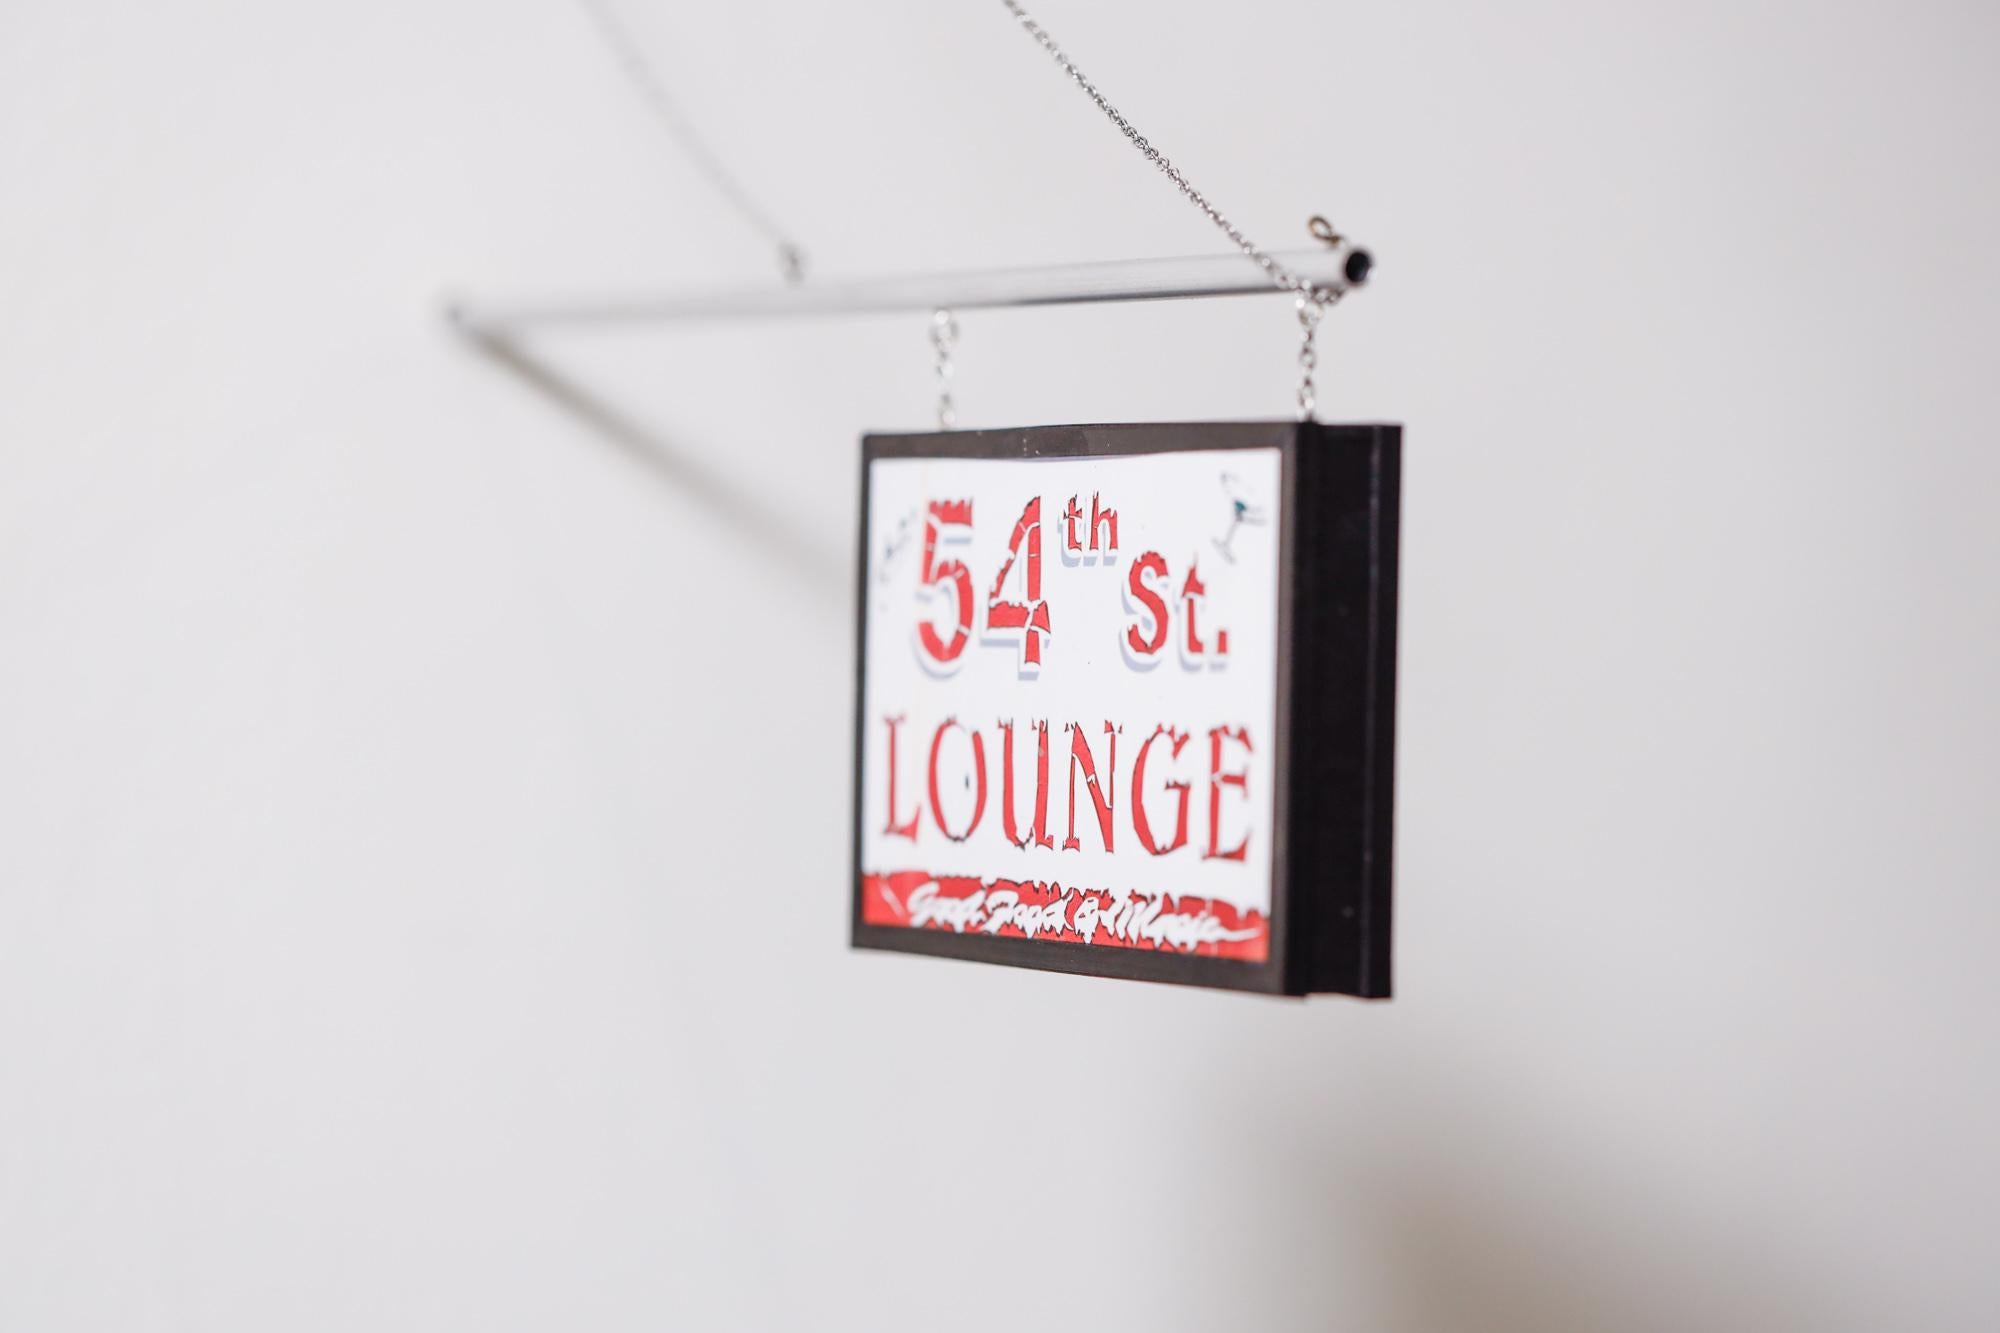 54th Street Lounge - Contemporary Sculpture by Drew Leshko